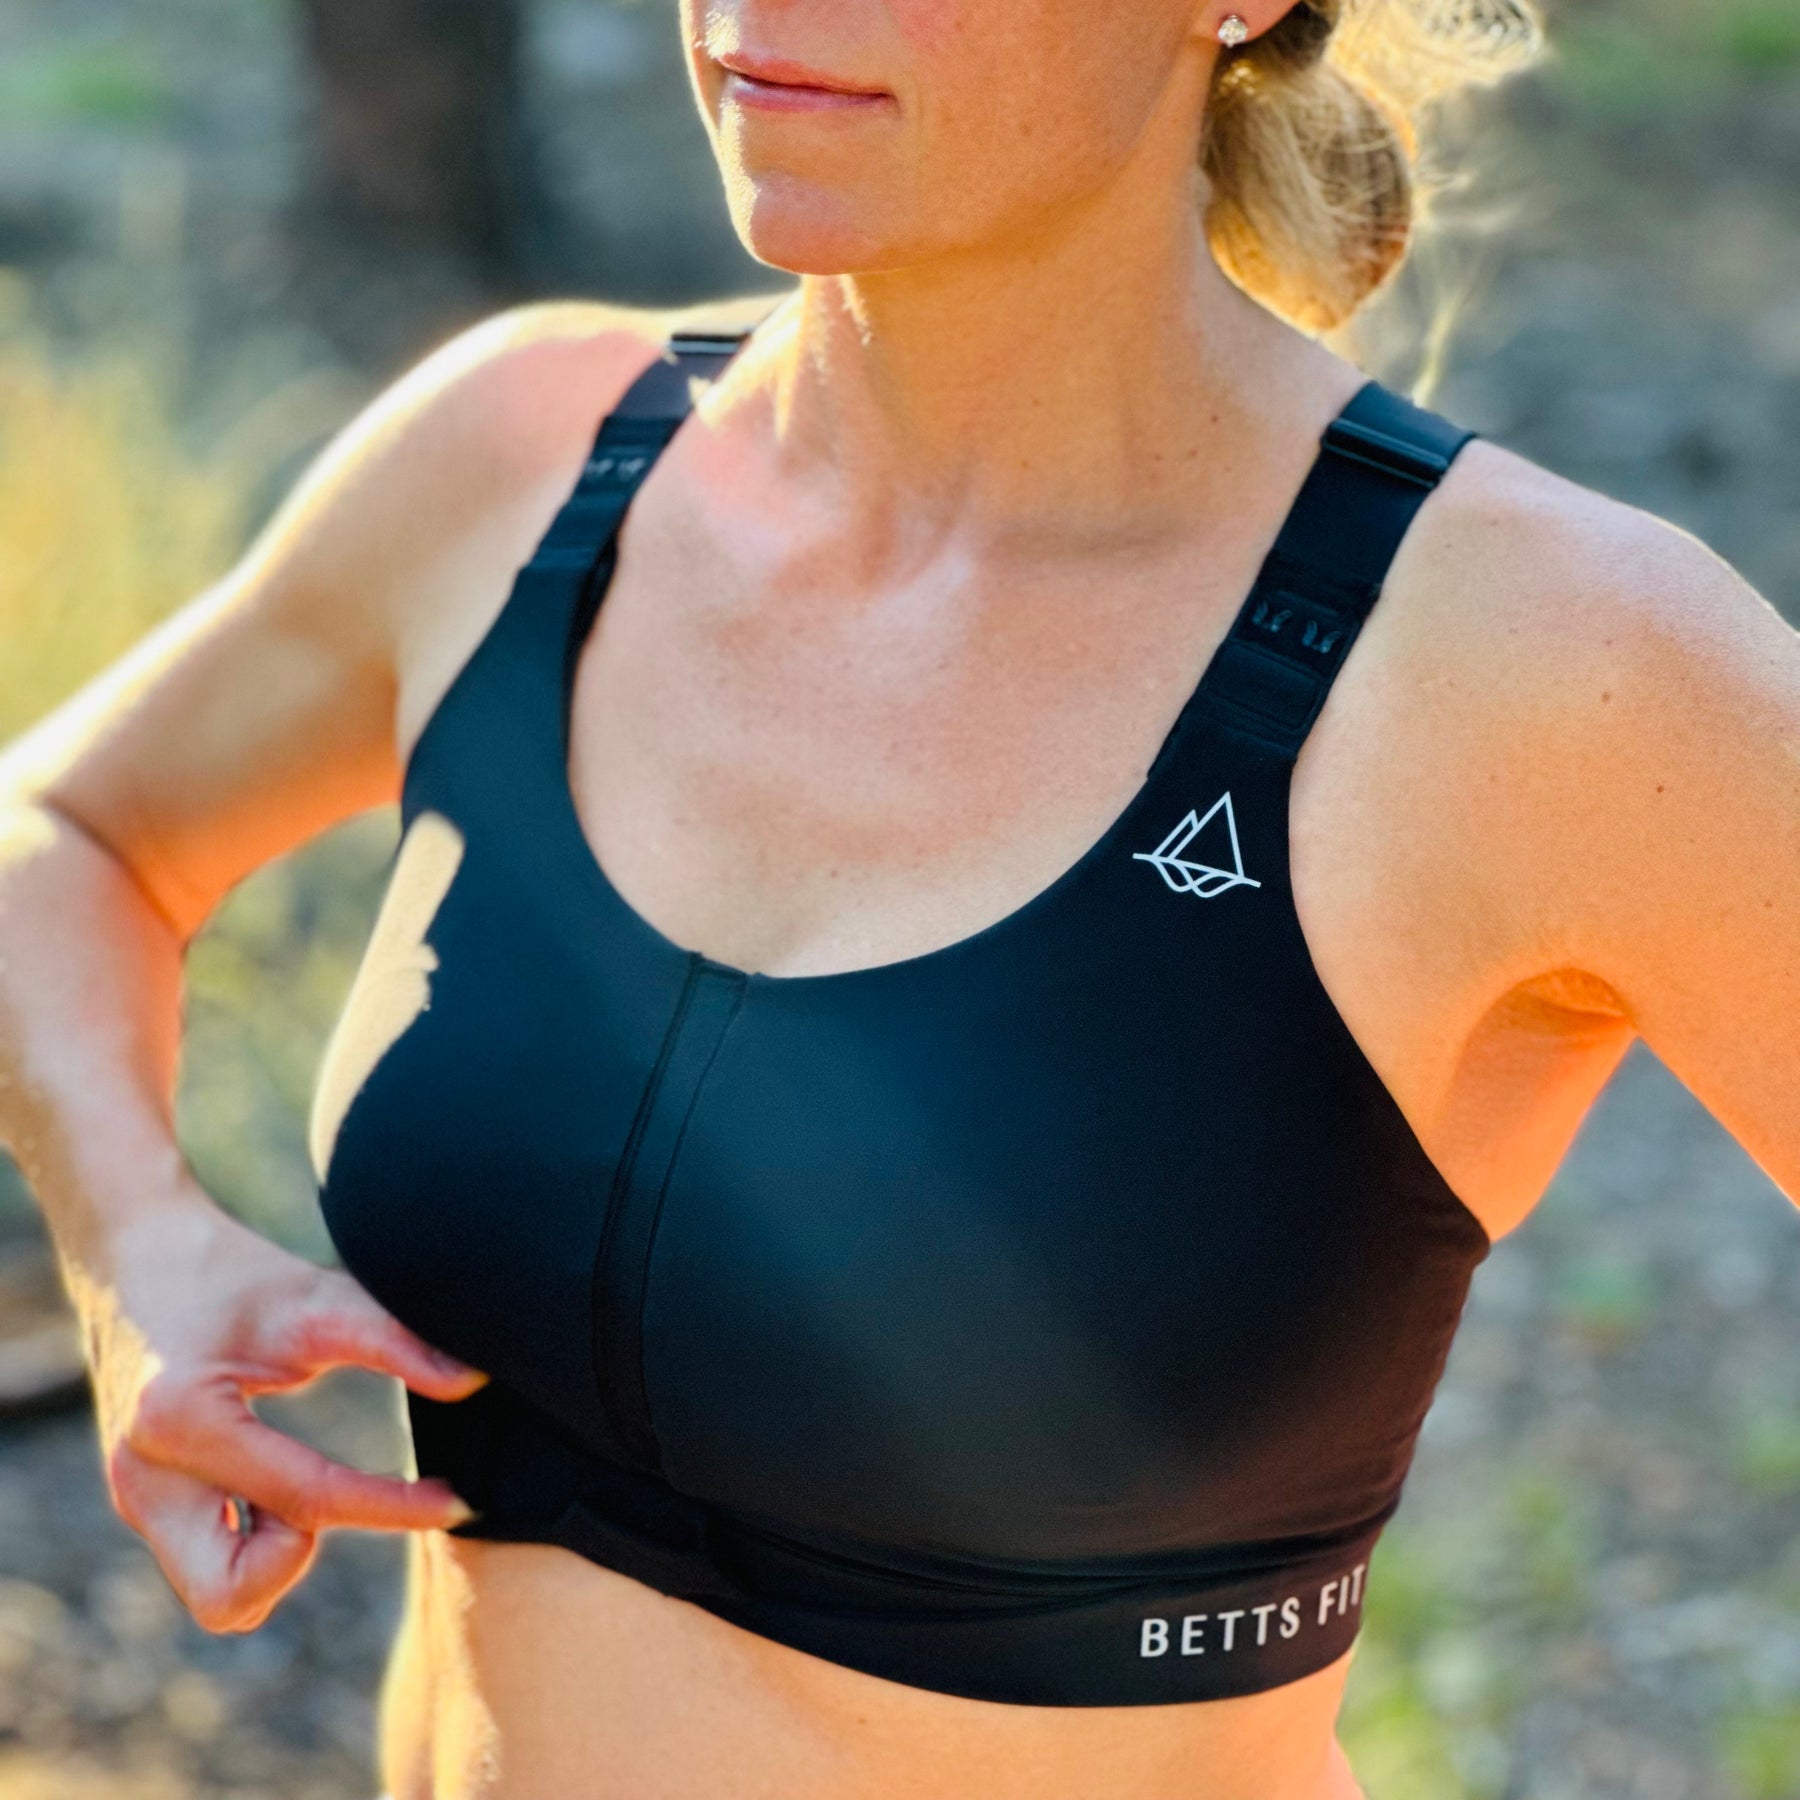 Betts Fit Sports Bra Review - Decidedly Equestrian